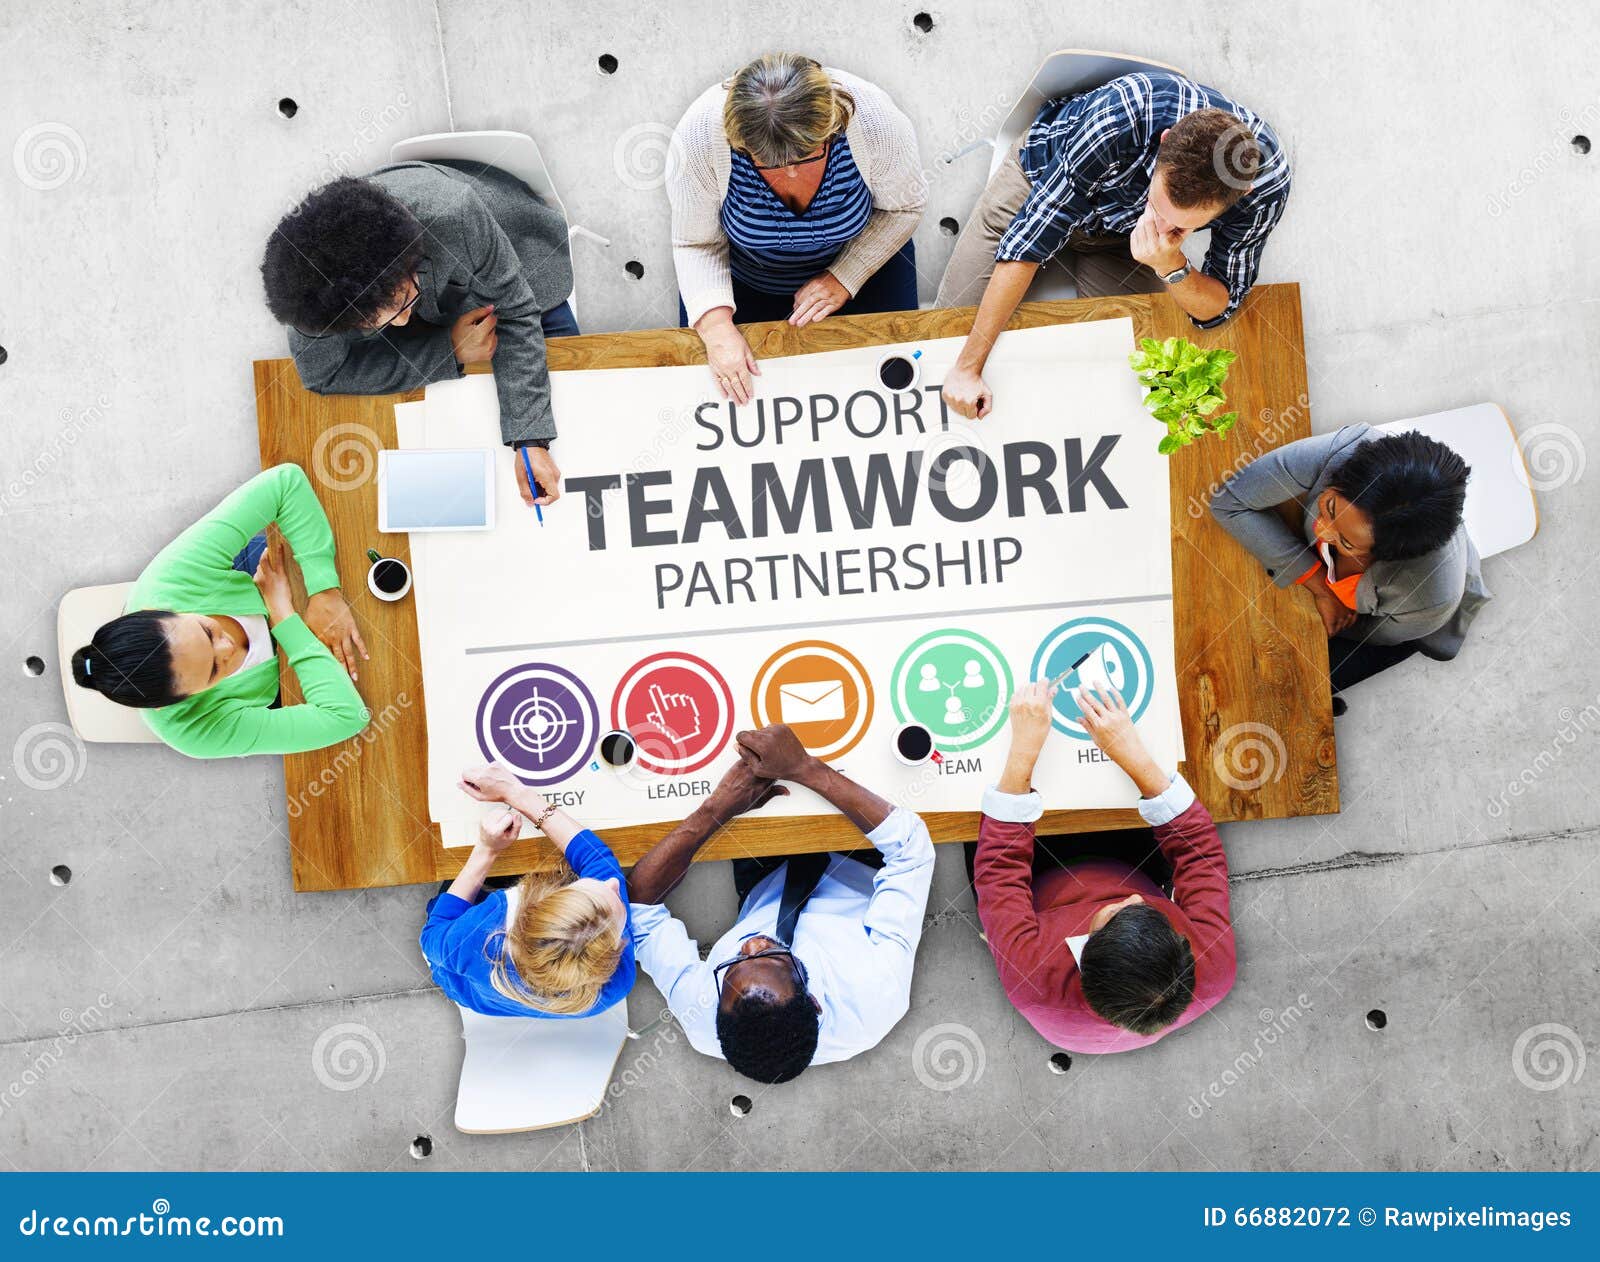 Support Teamwork Partnership Group Collaboration Concept Stock Photo ...